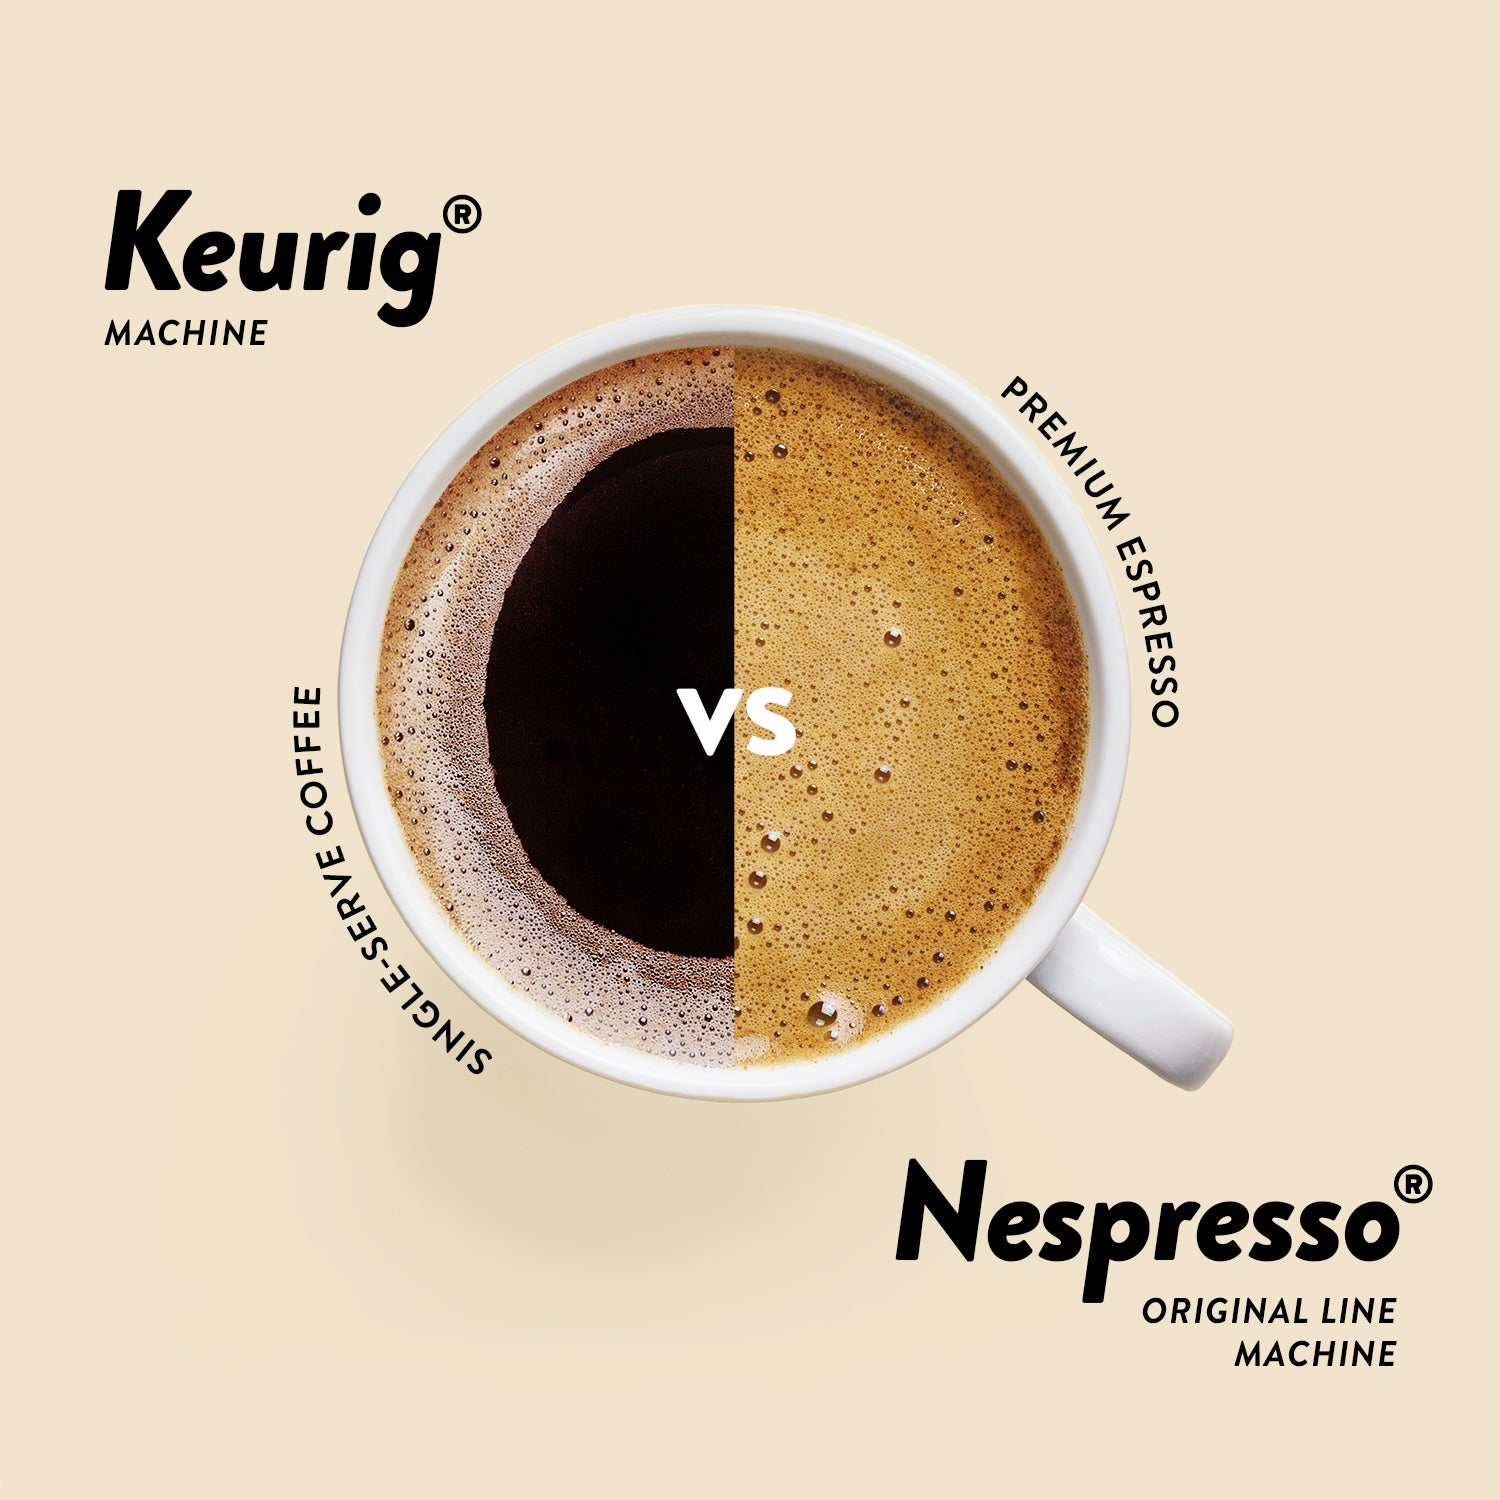 Keurig® vs Nespresso®: What's the difference?